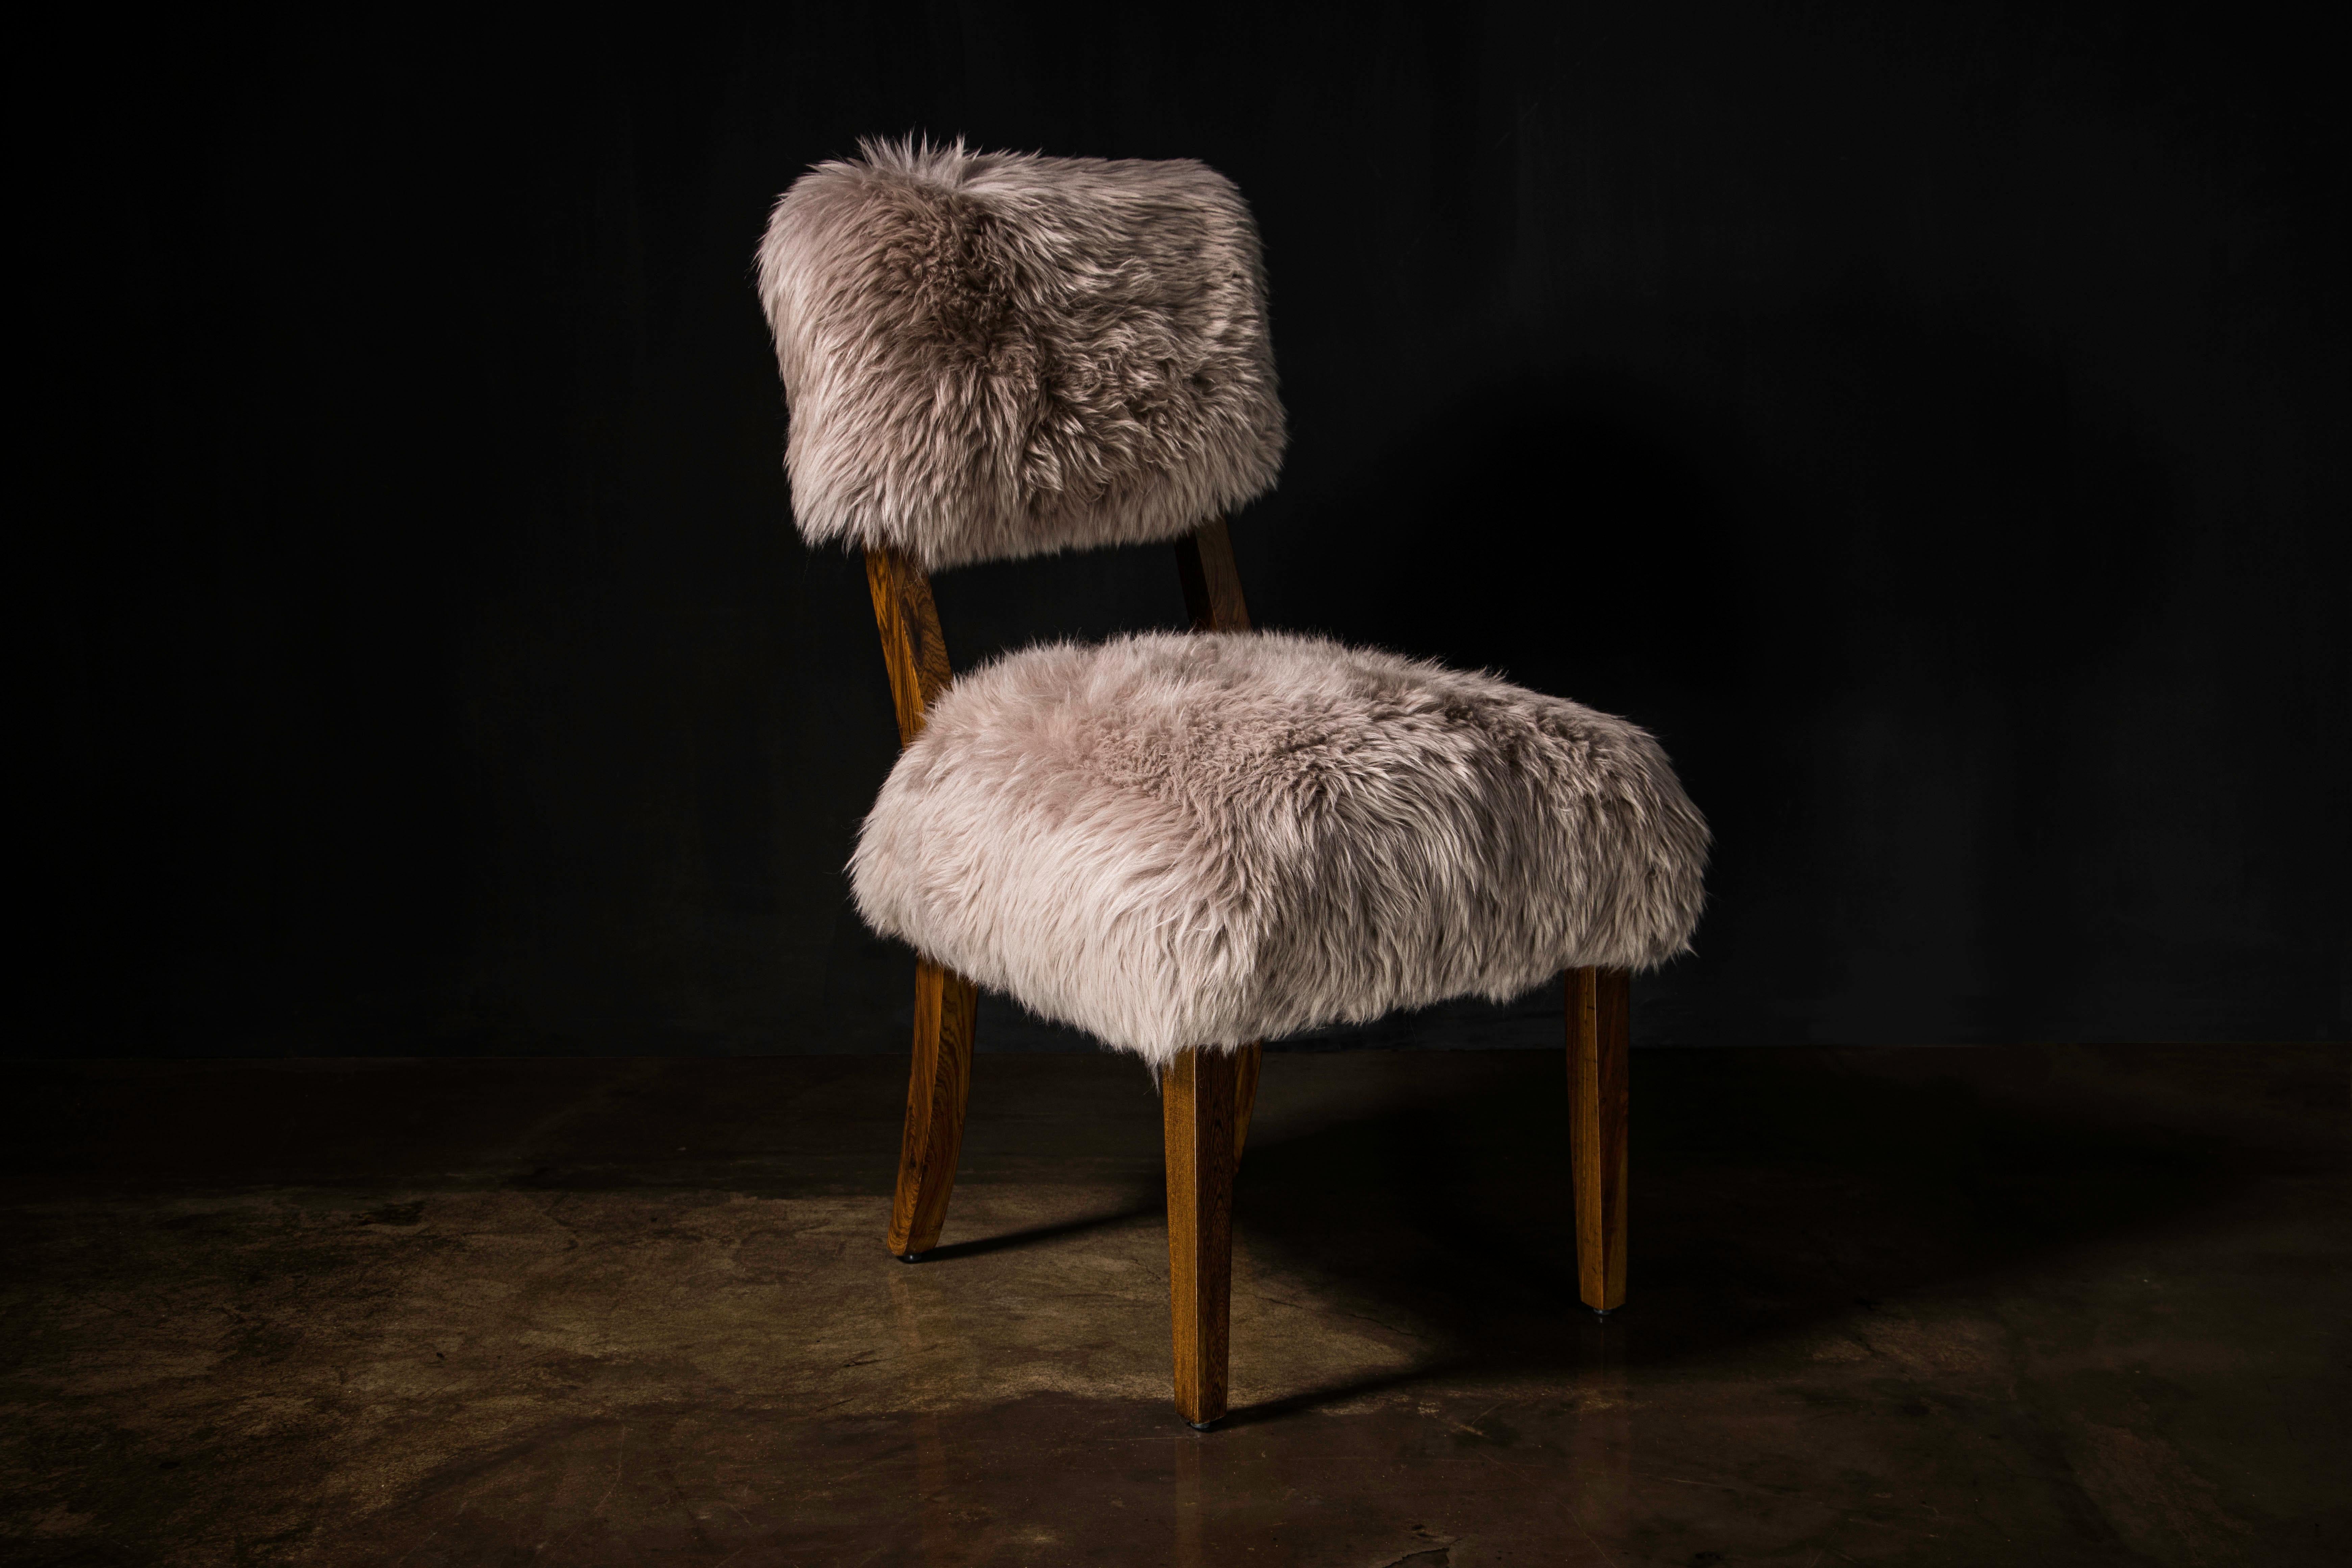 Luca Ovino Modern Dining Chair in Exotic Wood and Sheepskin from Costantini

The Luca Chair’s gently curved, high back exudes elegance and has become one of Costantini's most specified pieces. Now available in sheepskin.

Dimensions: 22